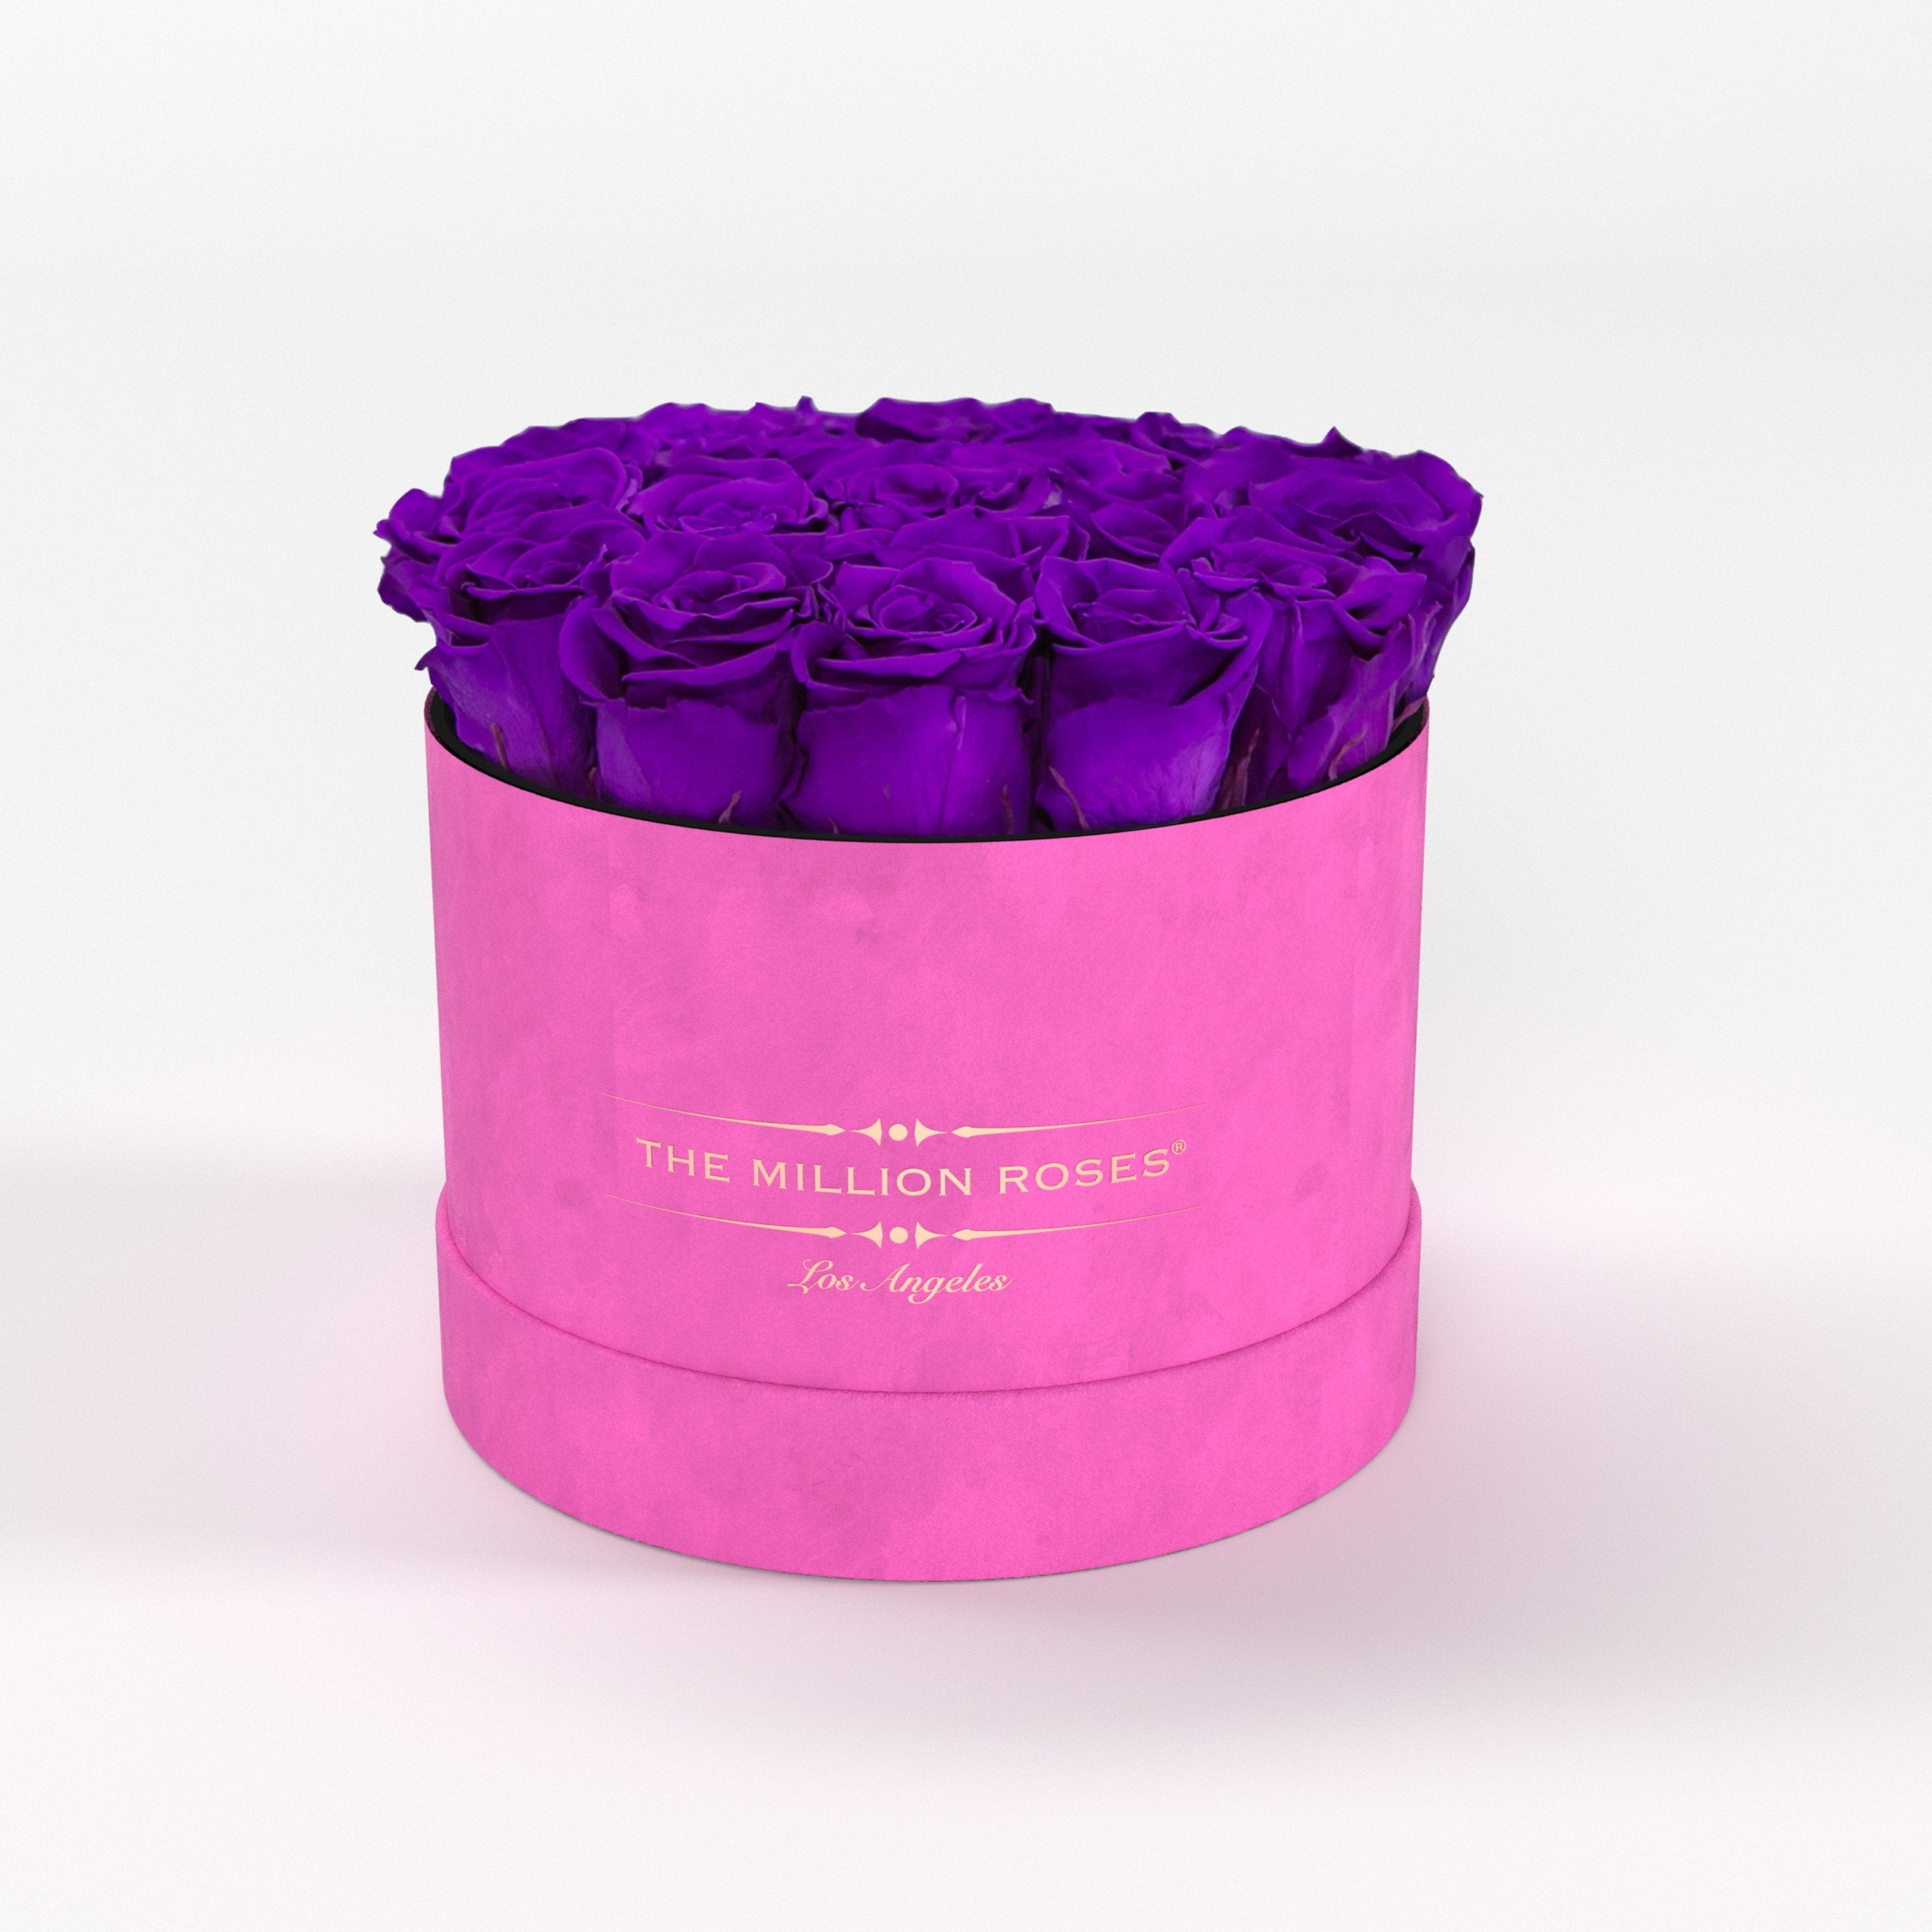 ( LA ) Hot Pink - Suede - Classic Box with Bright Purple Roses Kit - the million roses